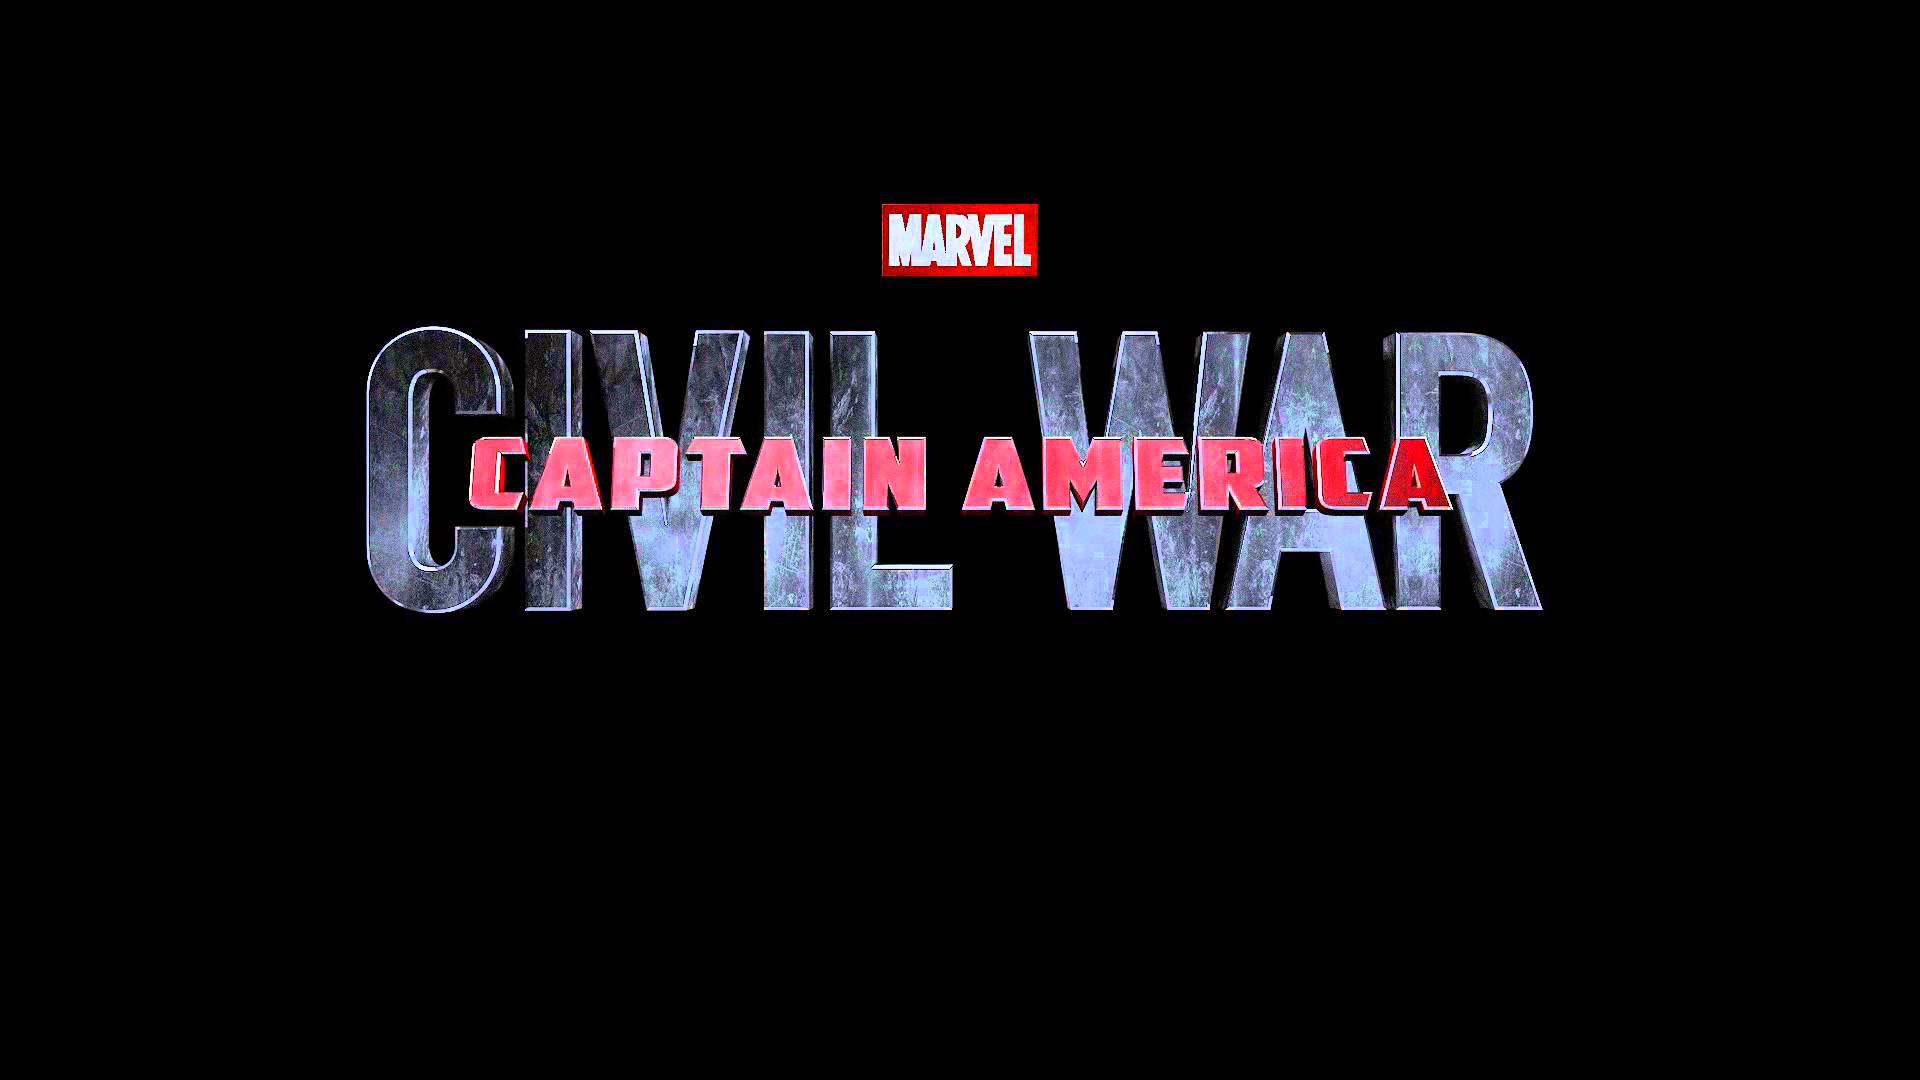 Captain America: Civil War wallpaper High Resolution and Quality